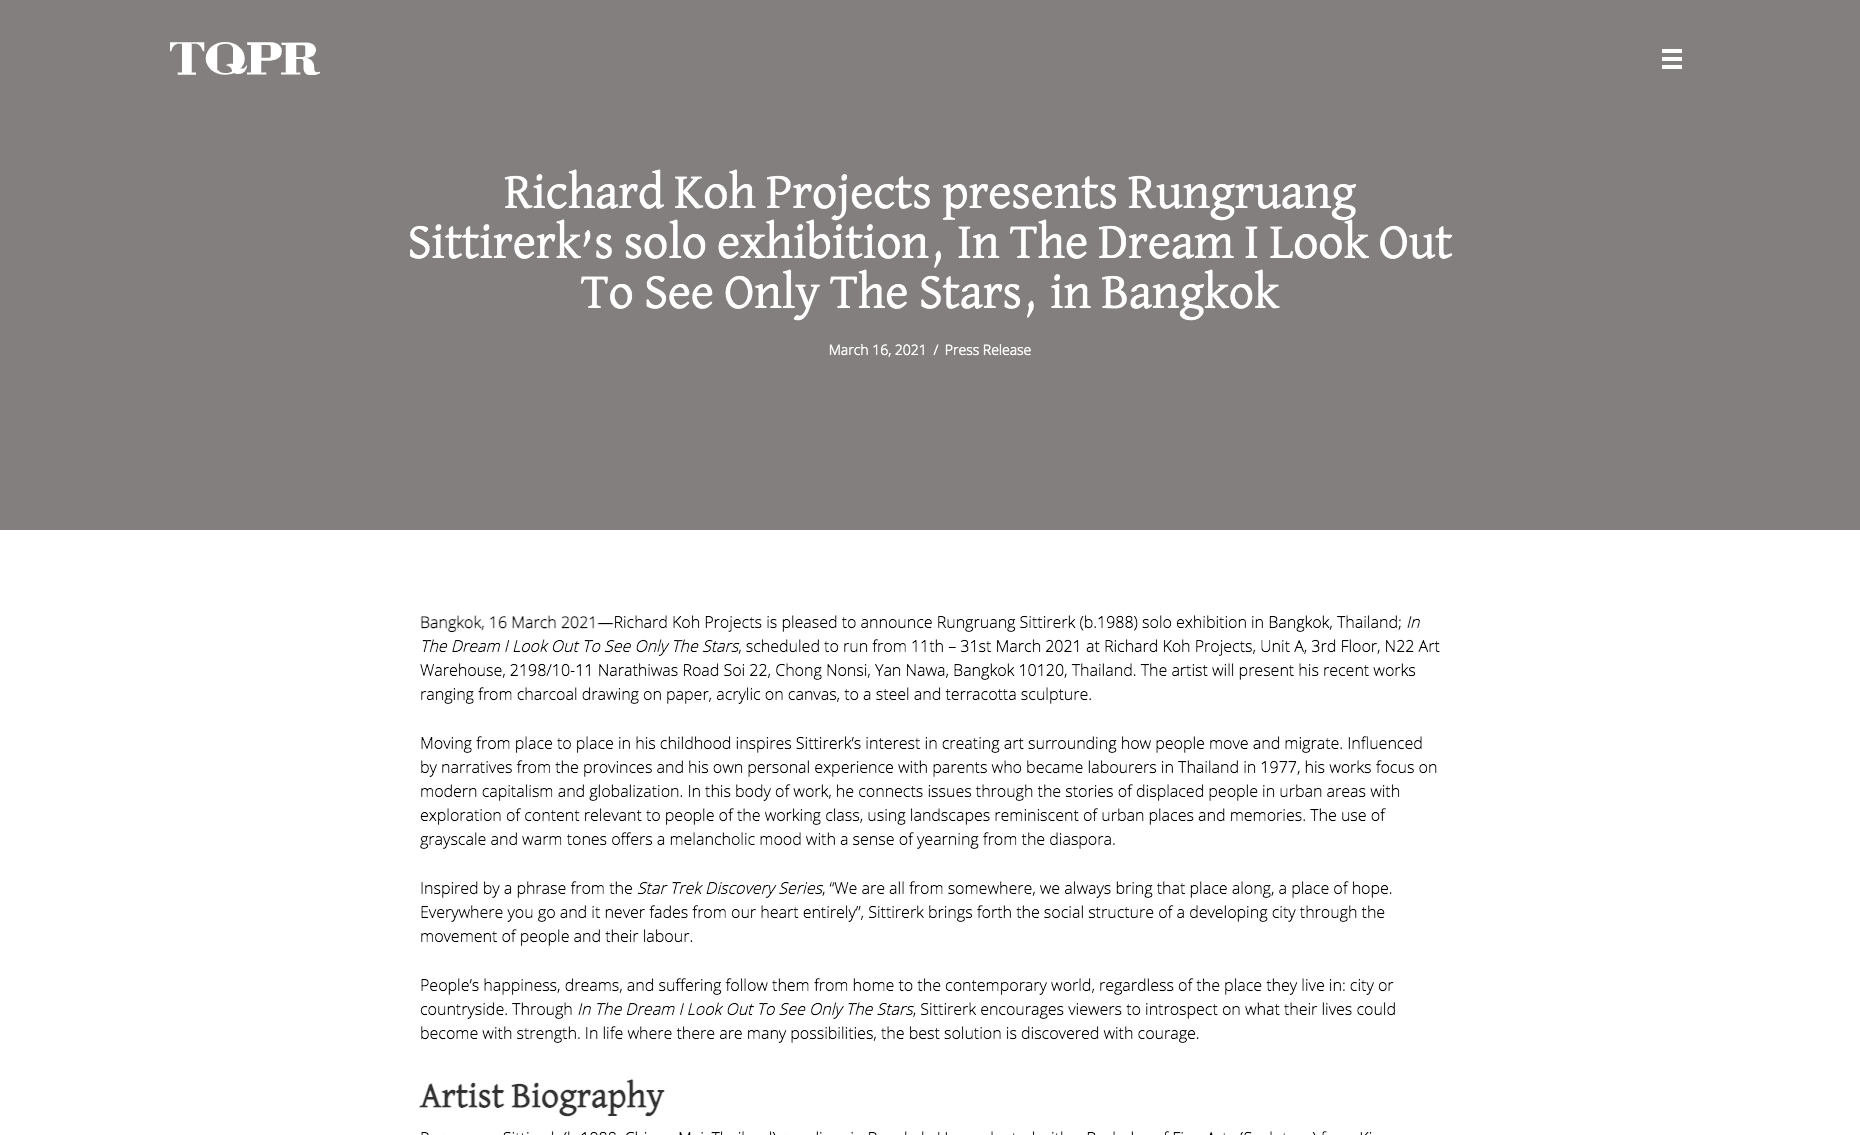 TQPR – Richard Koh Projects presents Rungruang Sittirerk’s solo exhibition, In The Dream I Look Out To See Only The Stars, in Bangkok